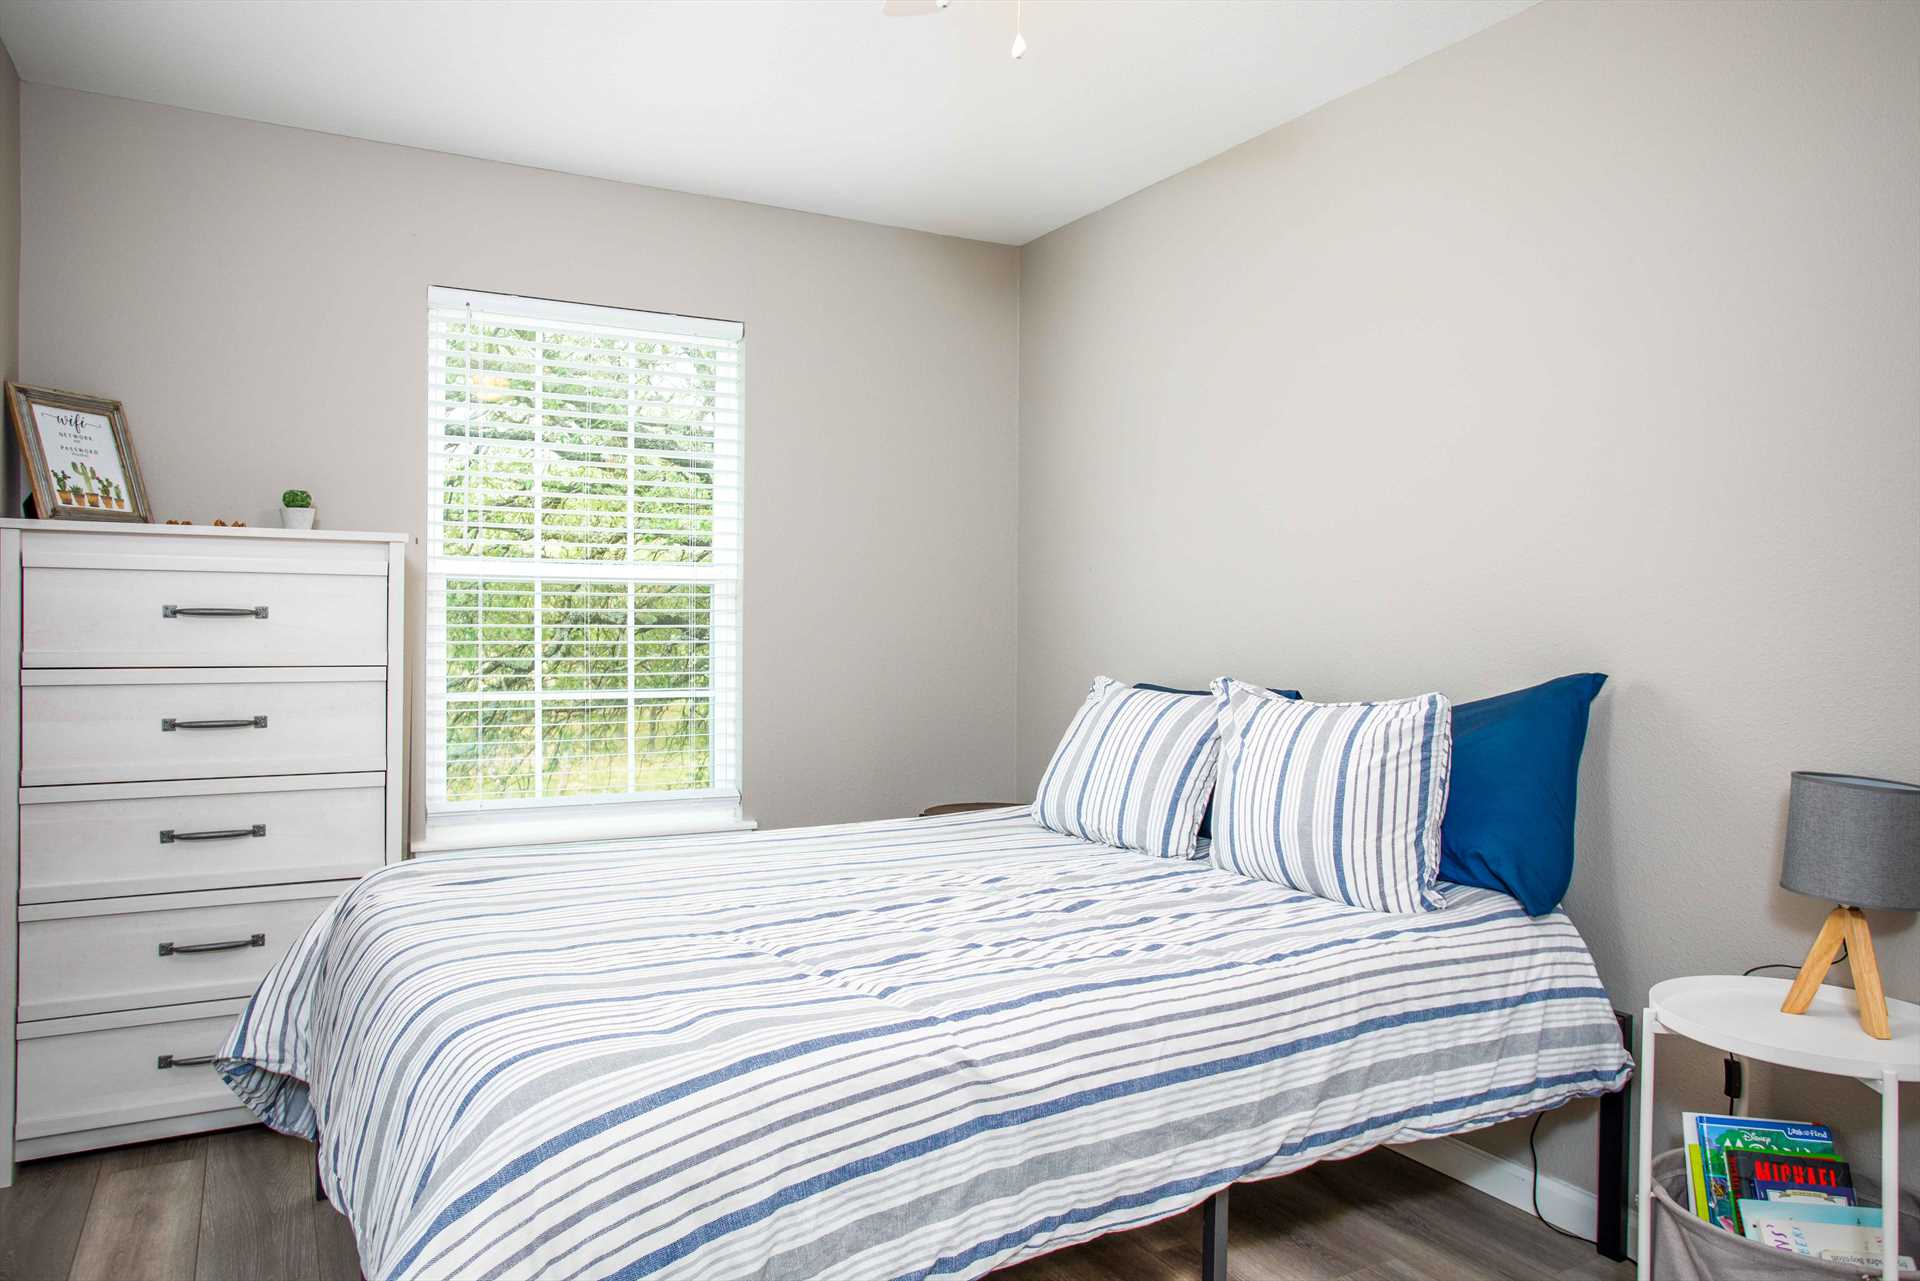                                                 A queen-sized bed graces the second bedroom, all all the sleeping spaces at the retreat include clean linens.